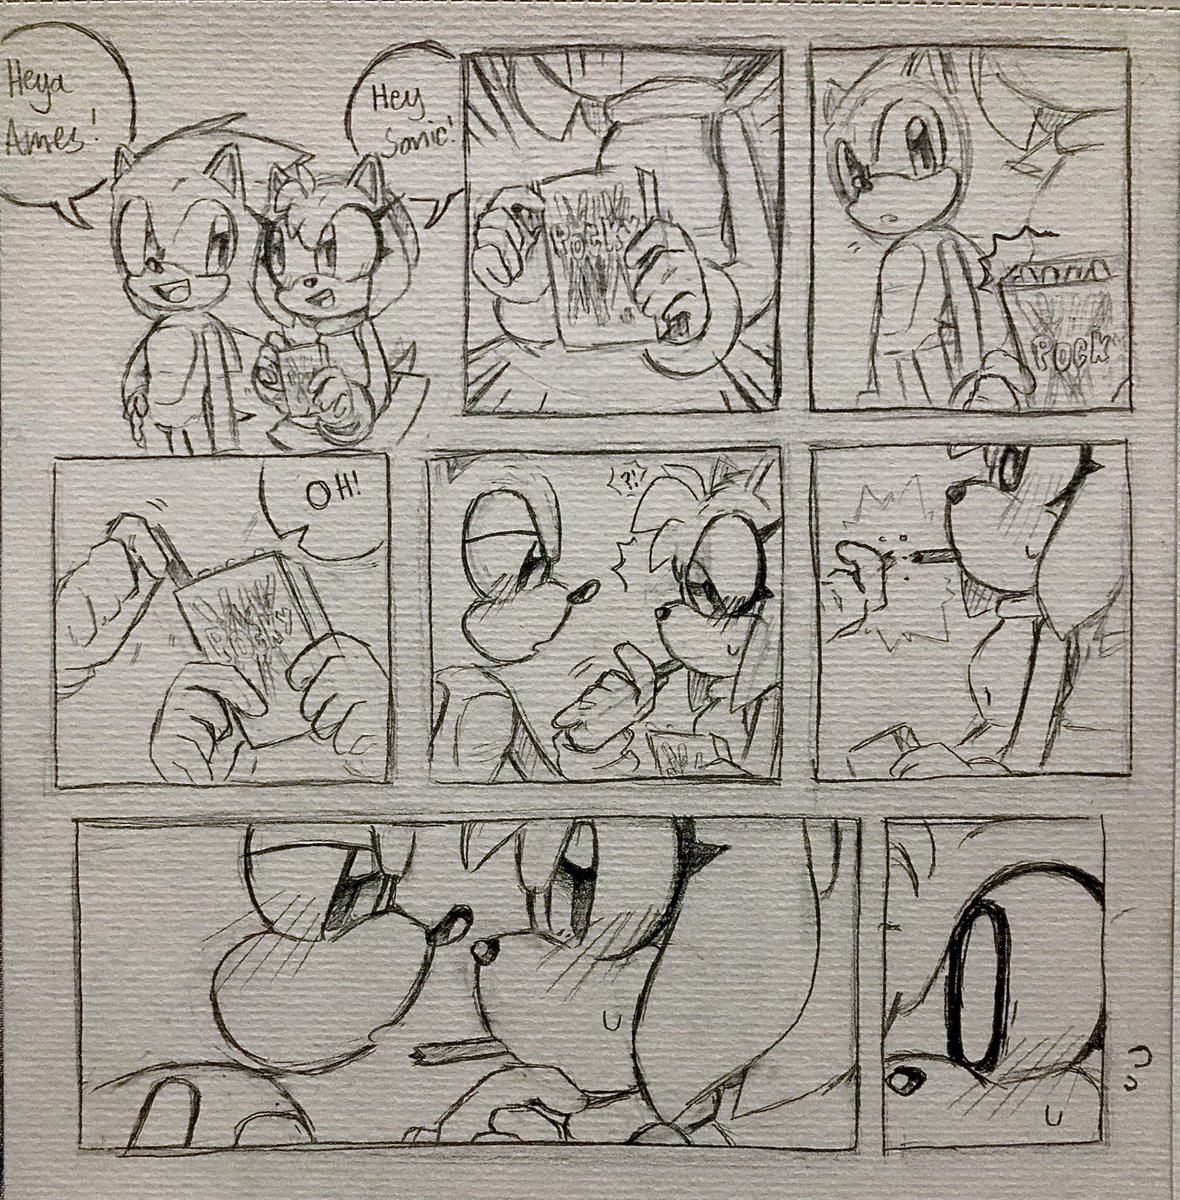 (Did this in my artober cus tbe prompt i gave this day was pocky) 

Have this cliffhanger of a comic
You guys can beg for an ending, if you want an ending XD

#SonAmy